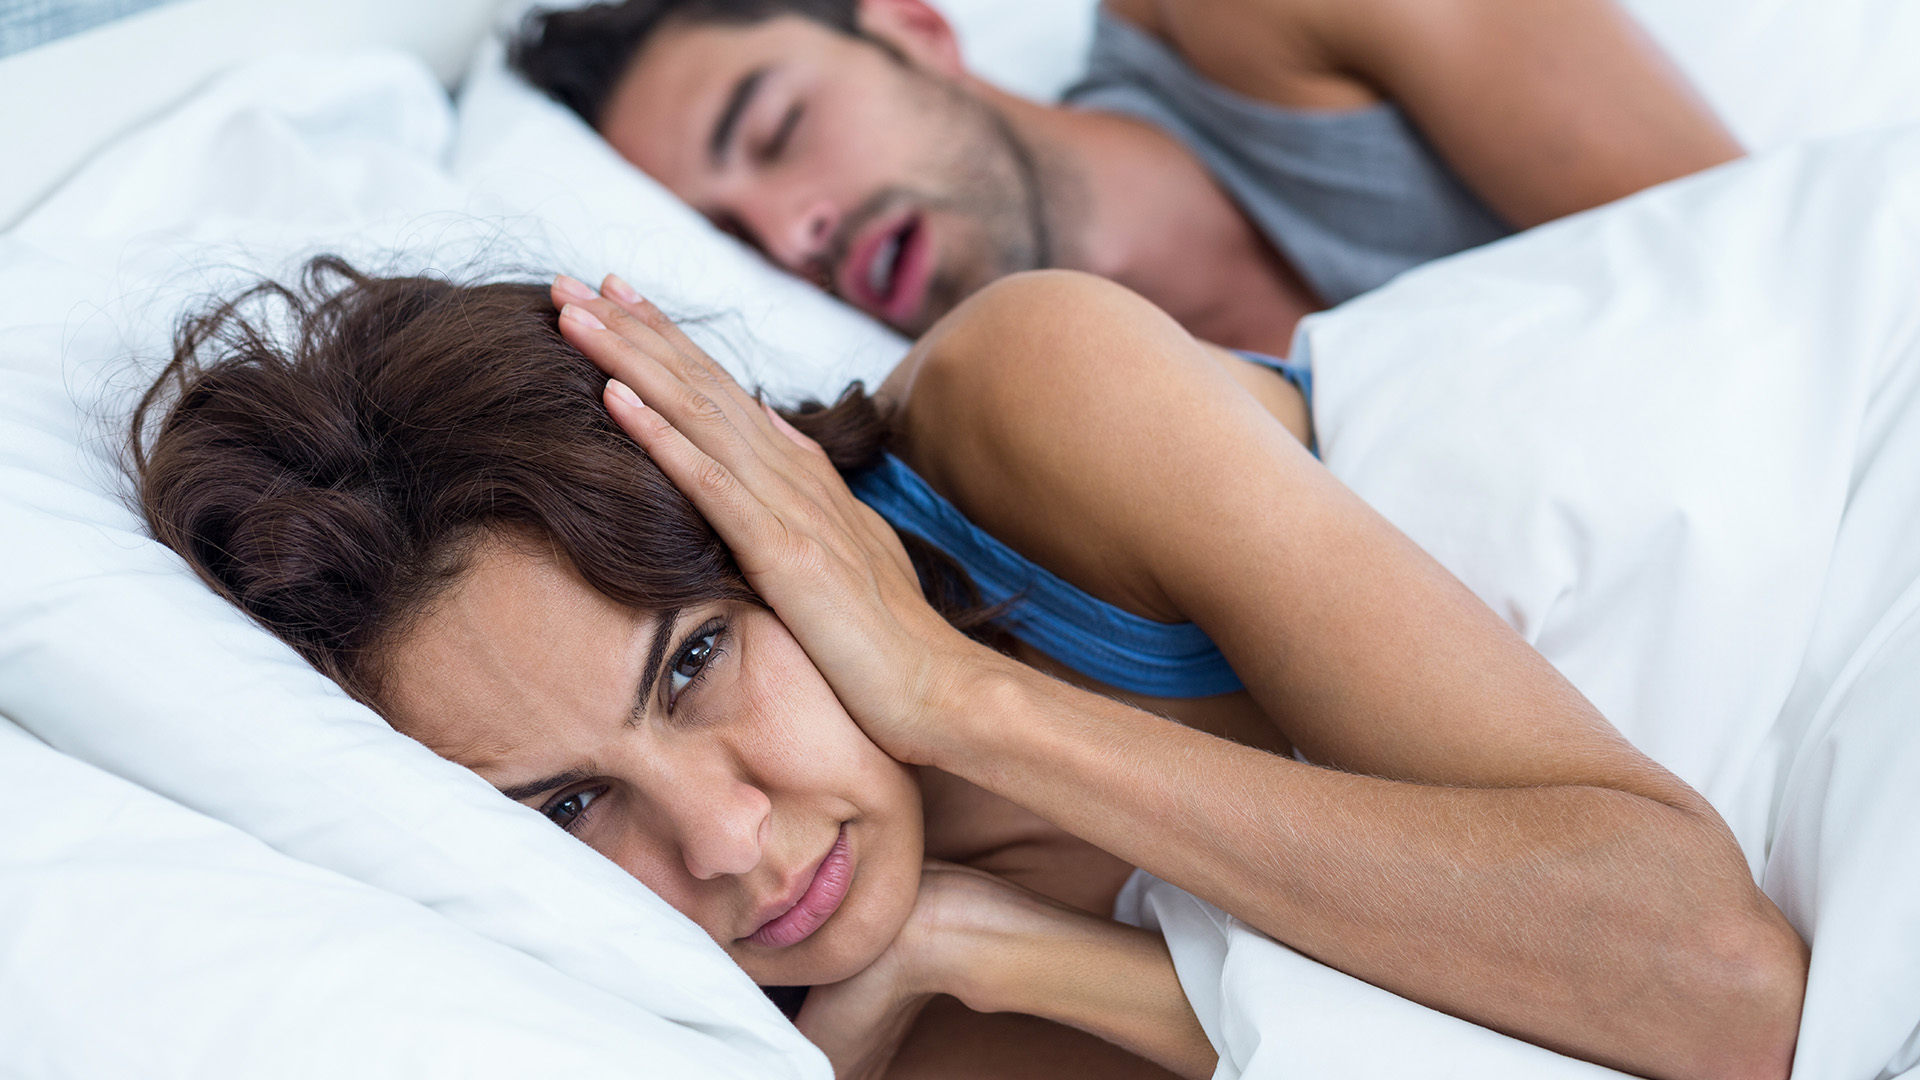 New Sleeping Arrangements Could Lead to a Healthier Relationship